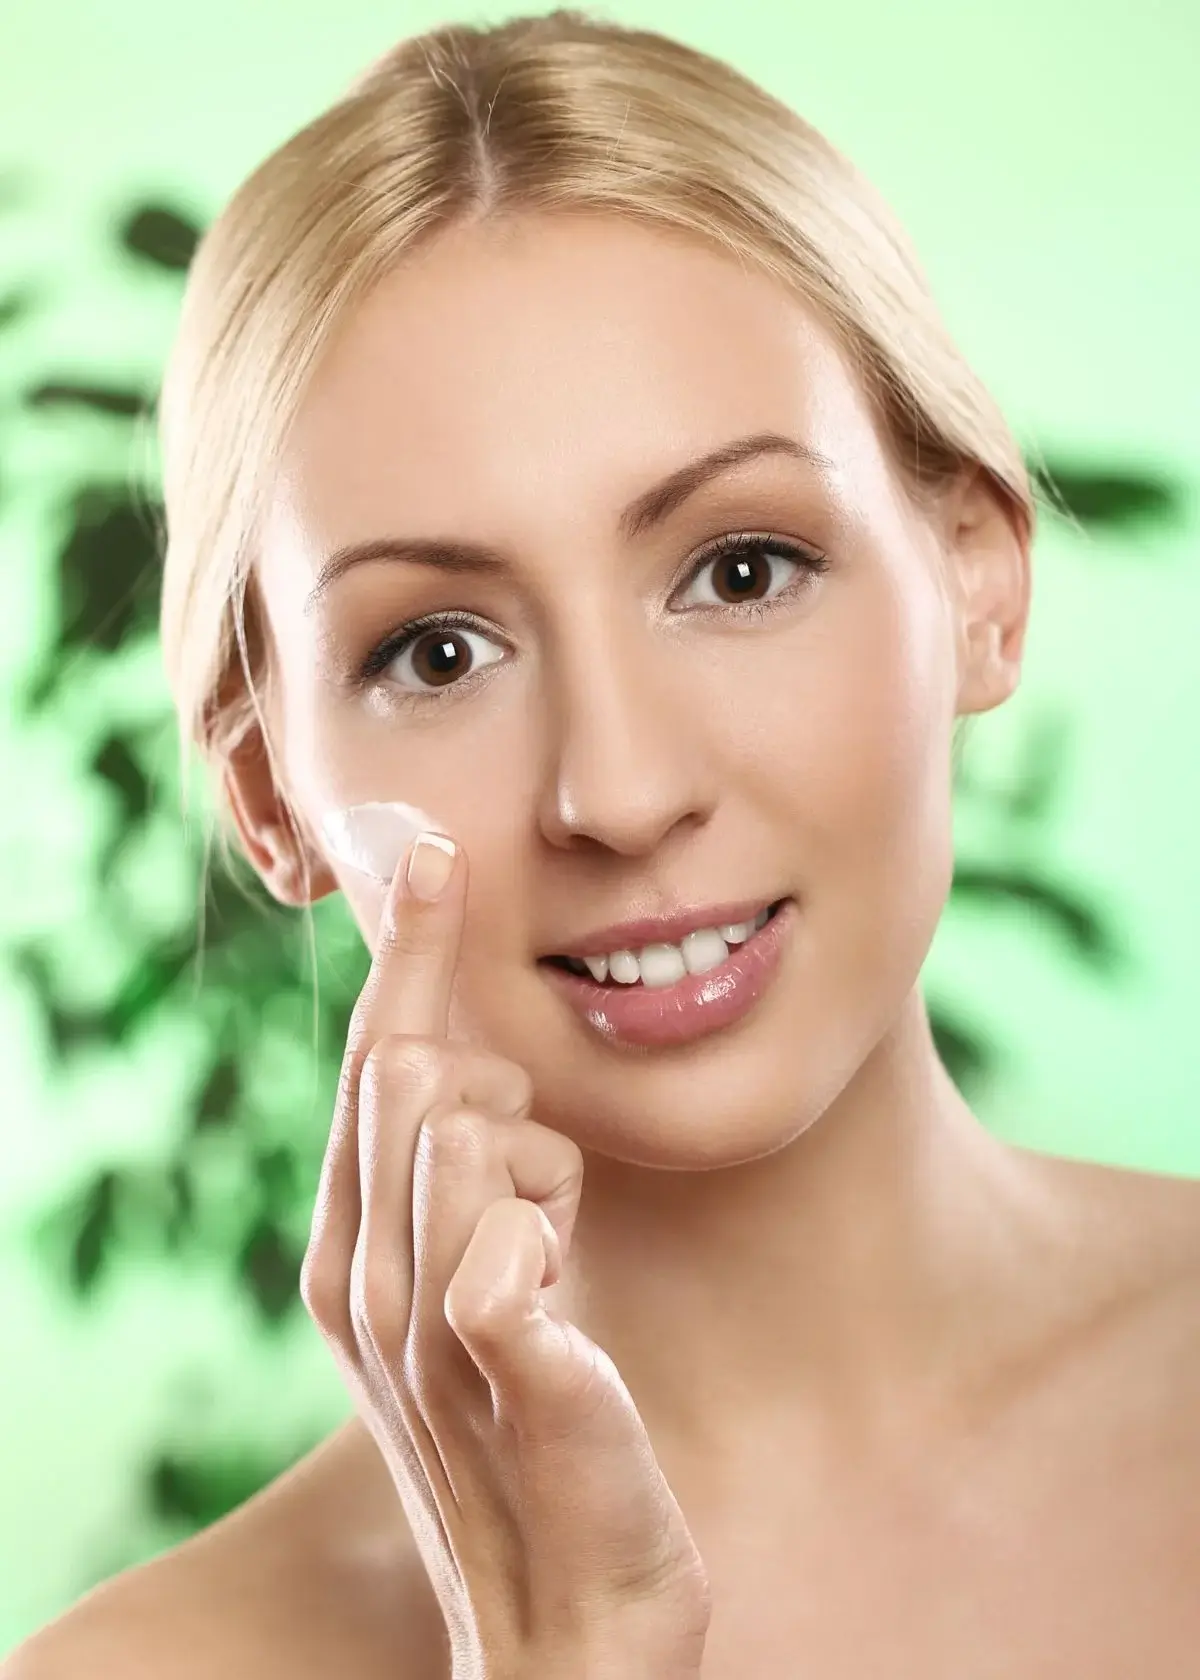 What benefits can I expect from using polypeptide creams?